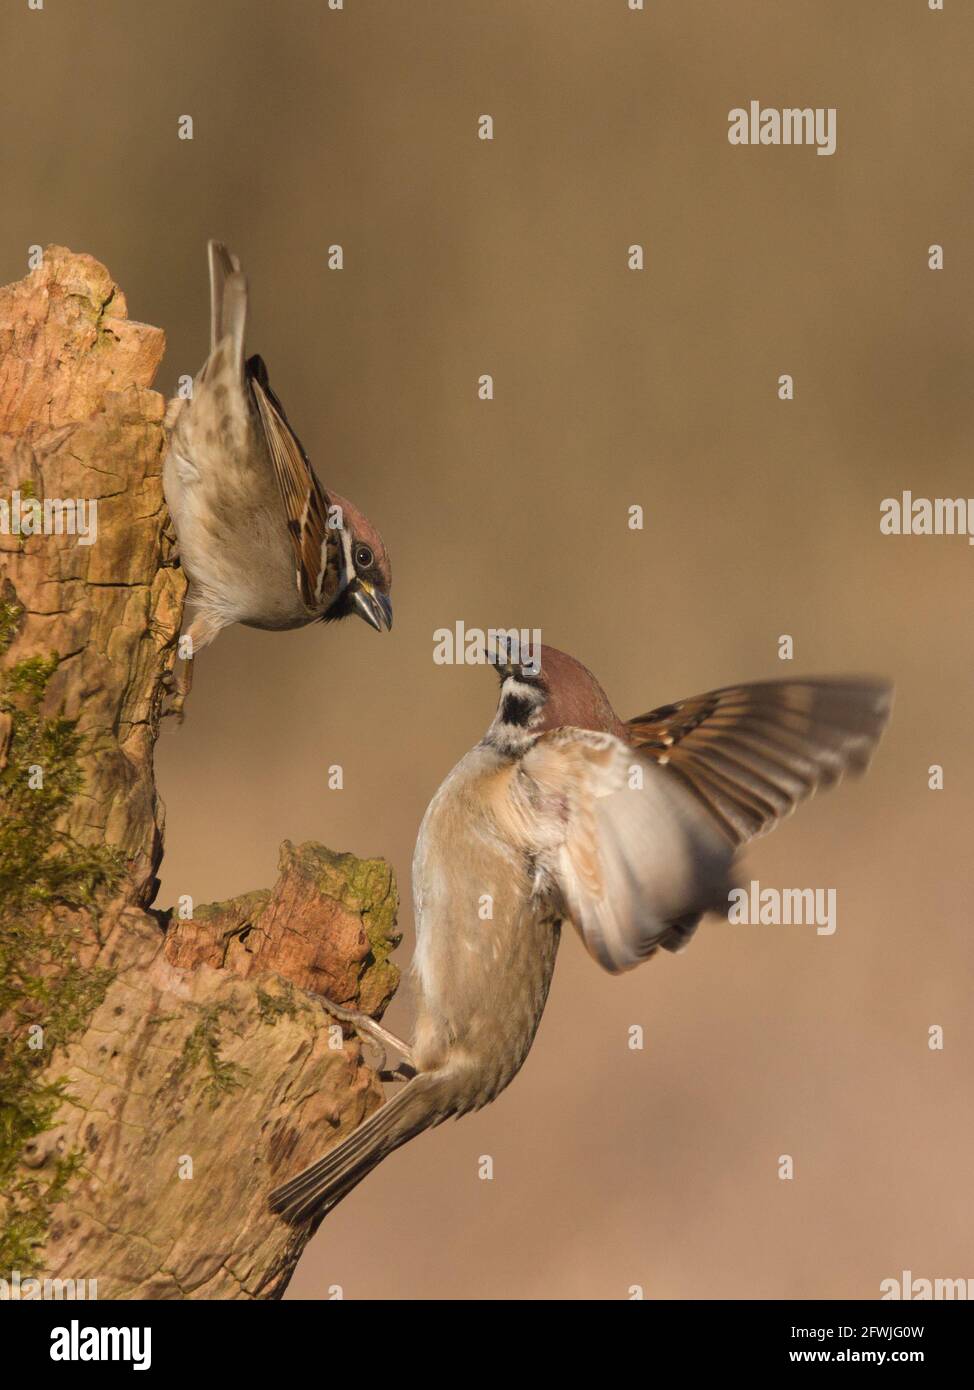 Two tree sparrows quarreling on a log Stock Photo